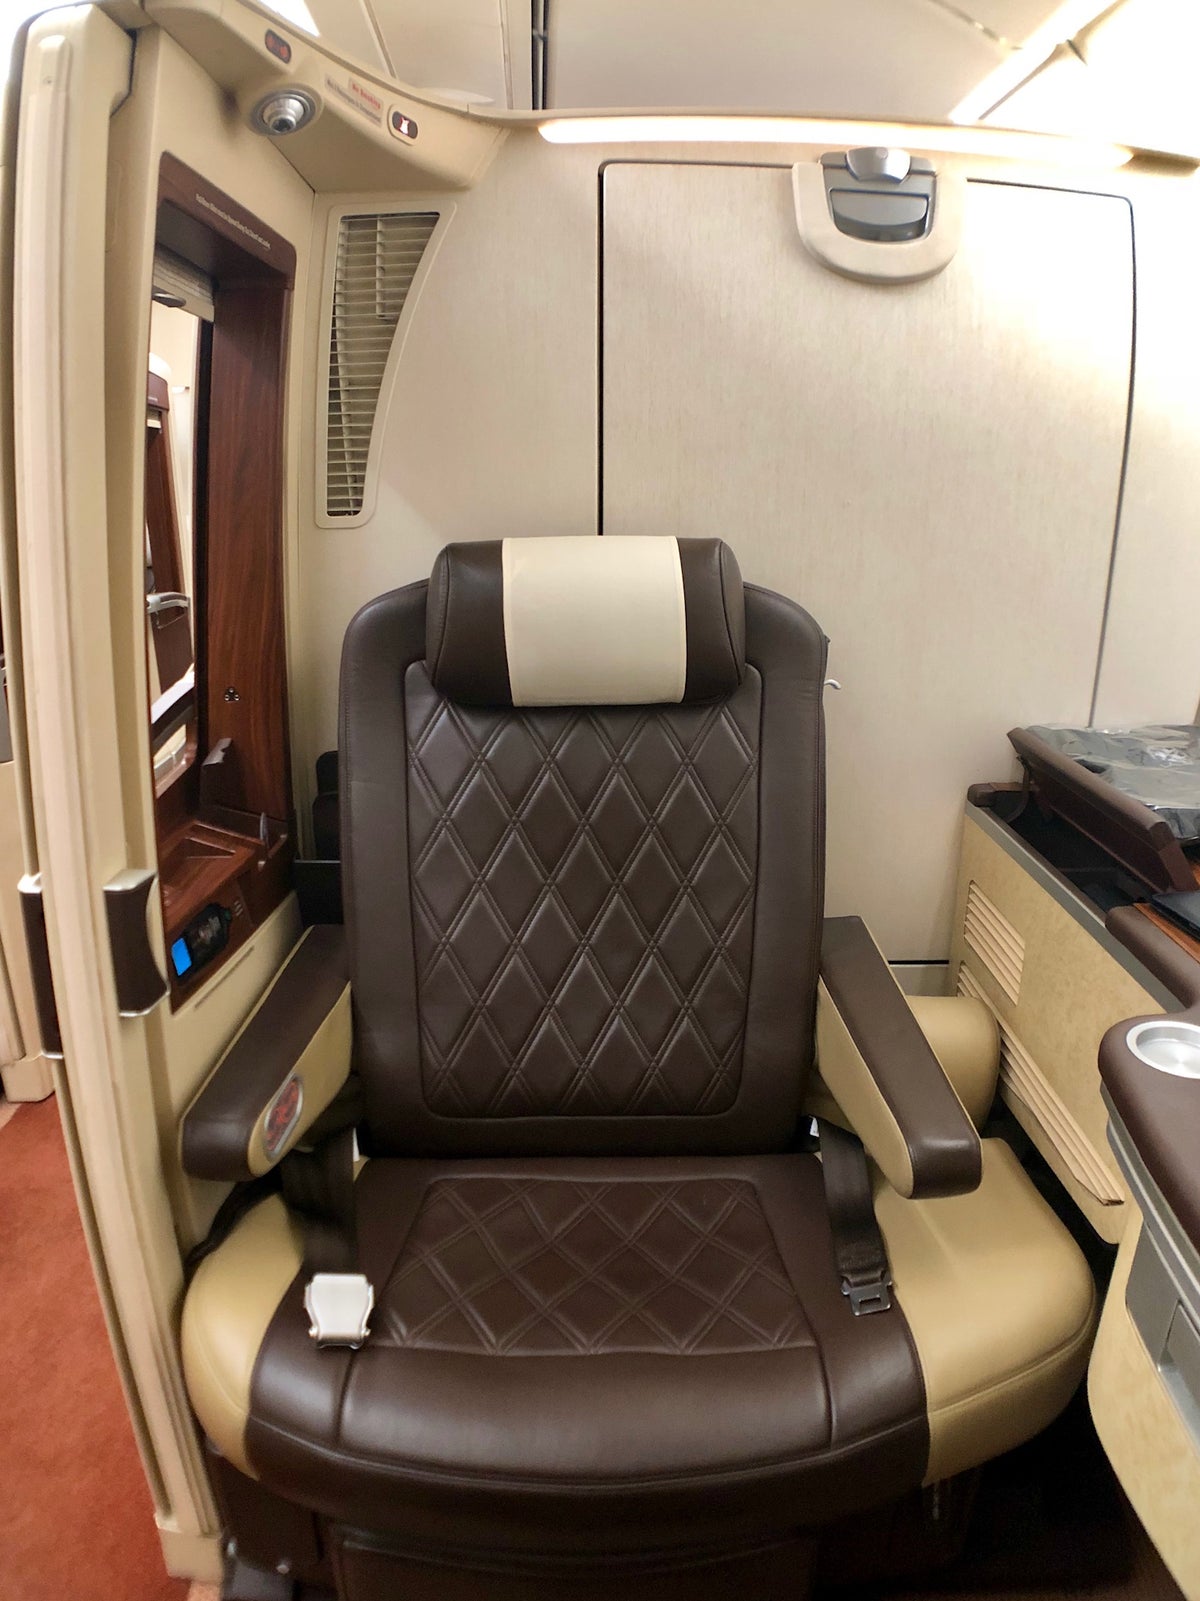 Singapore Airlines First Class Suites JFK to Frankfurt - Seat 2A